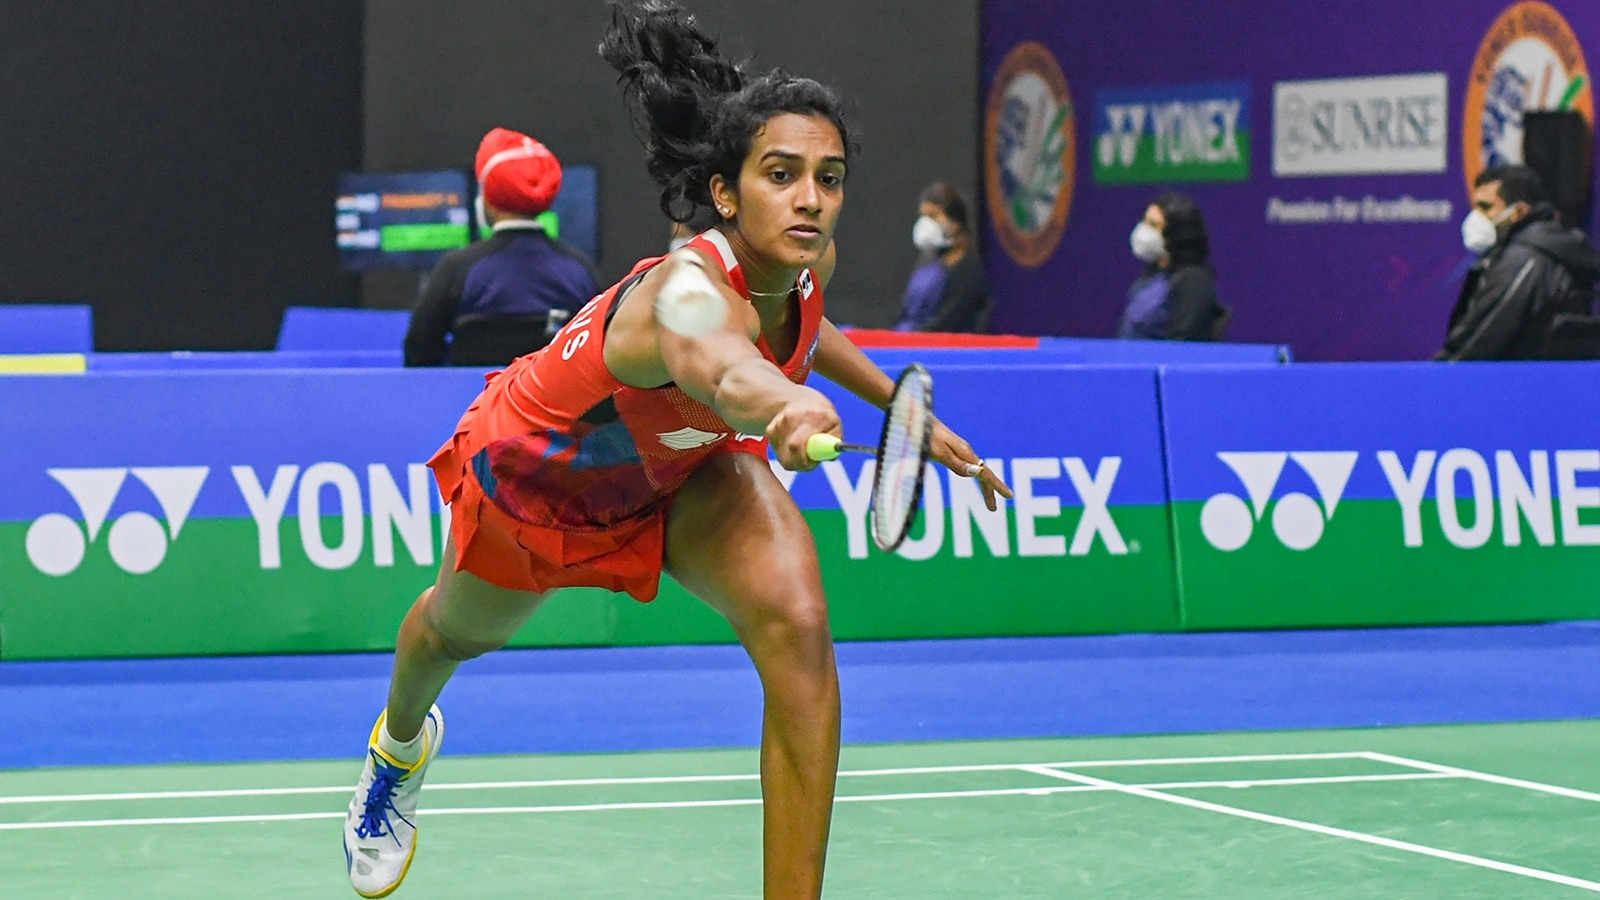 After losses in Germany and England, winning Swiss Open was important Sindhu